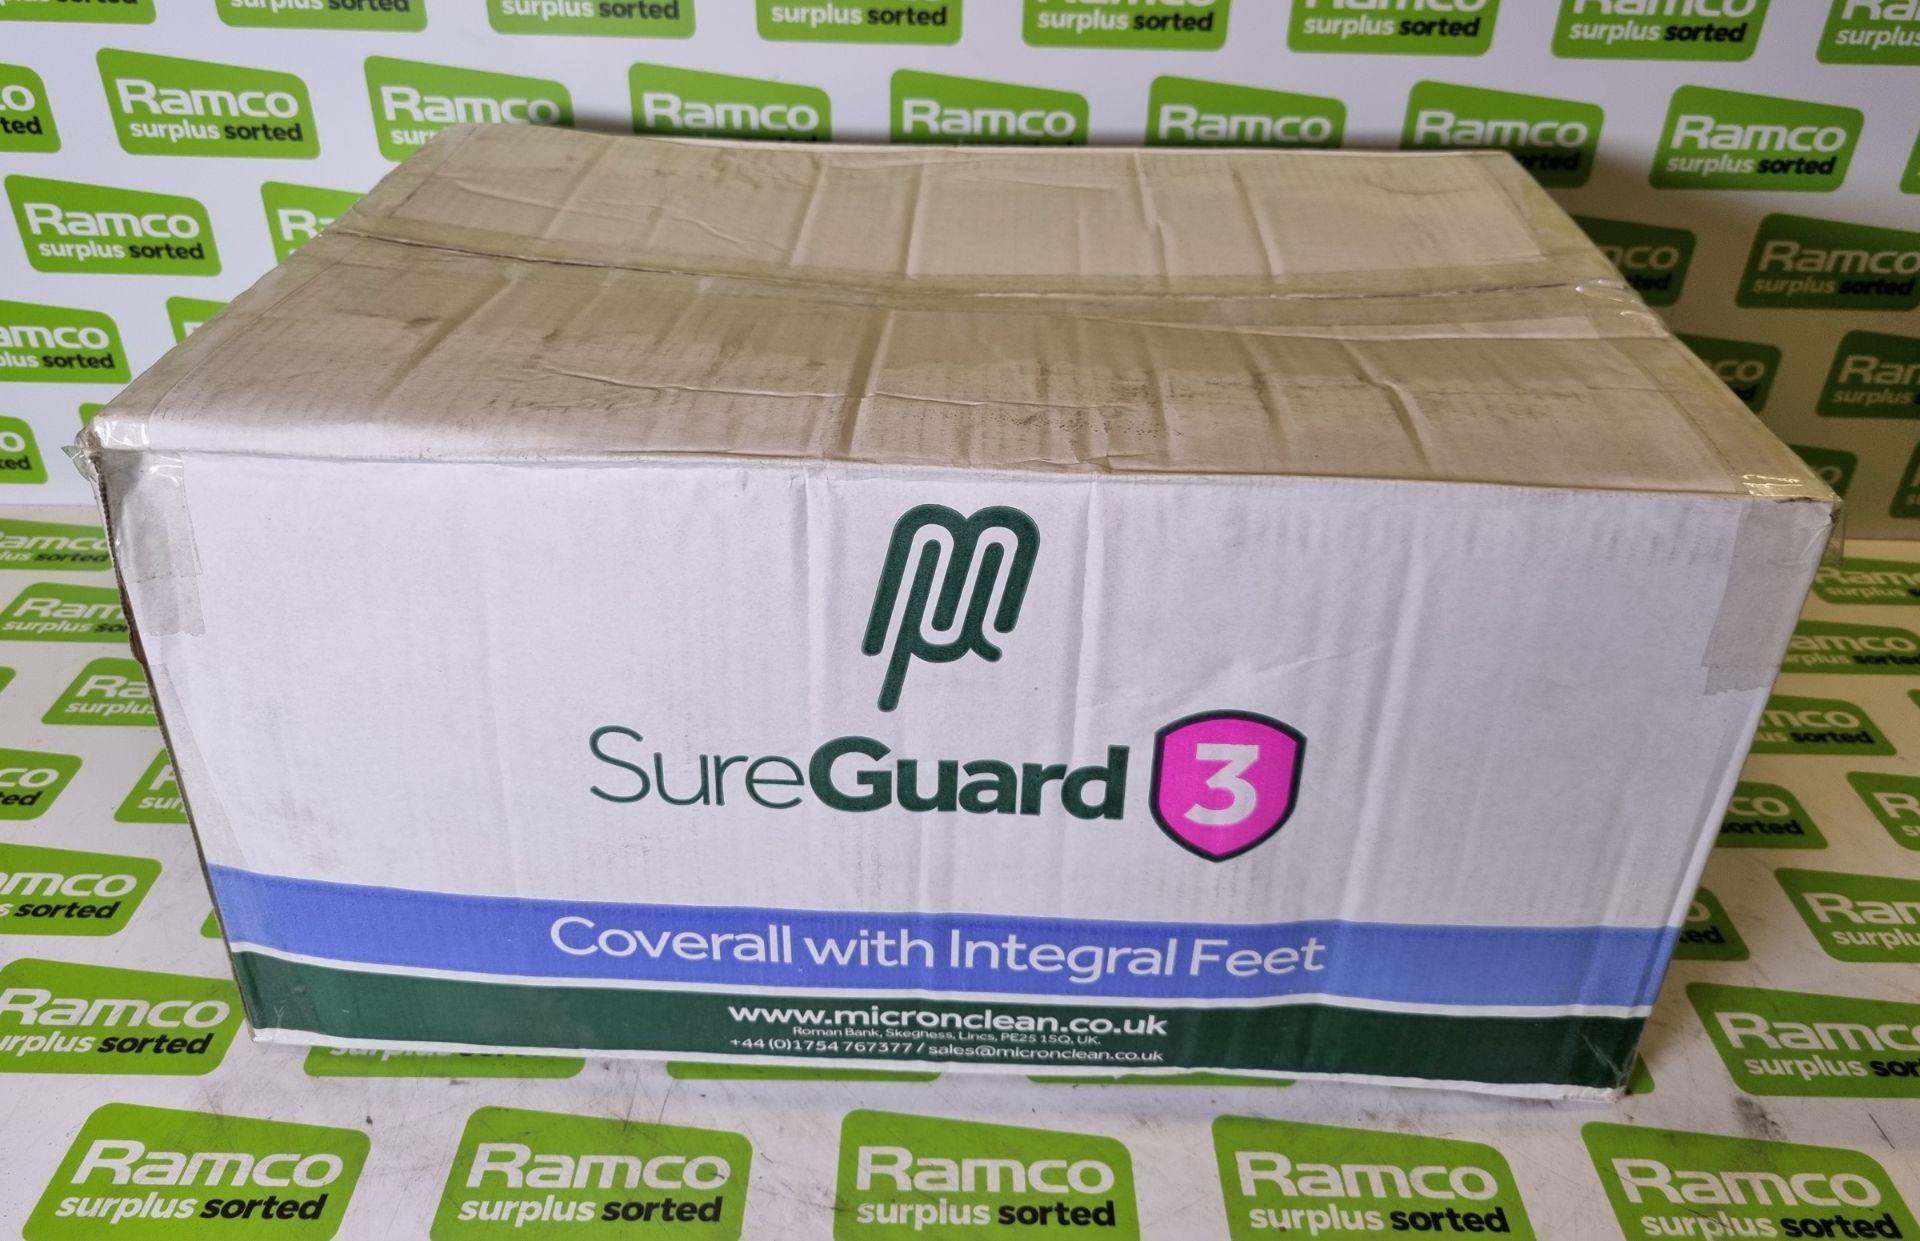 MicroClean SureGuard 3 - size Medium coverall with integral feet - 25 units per box - Image 3 of 4